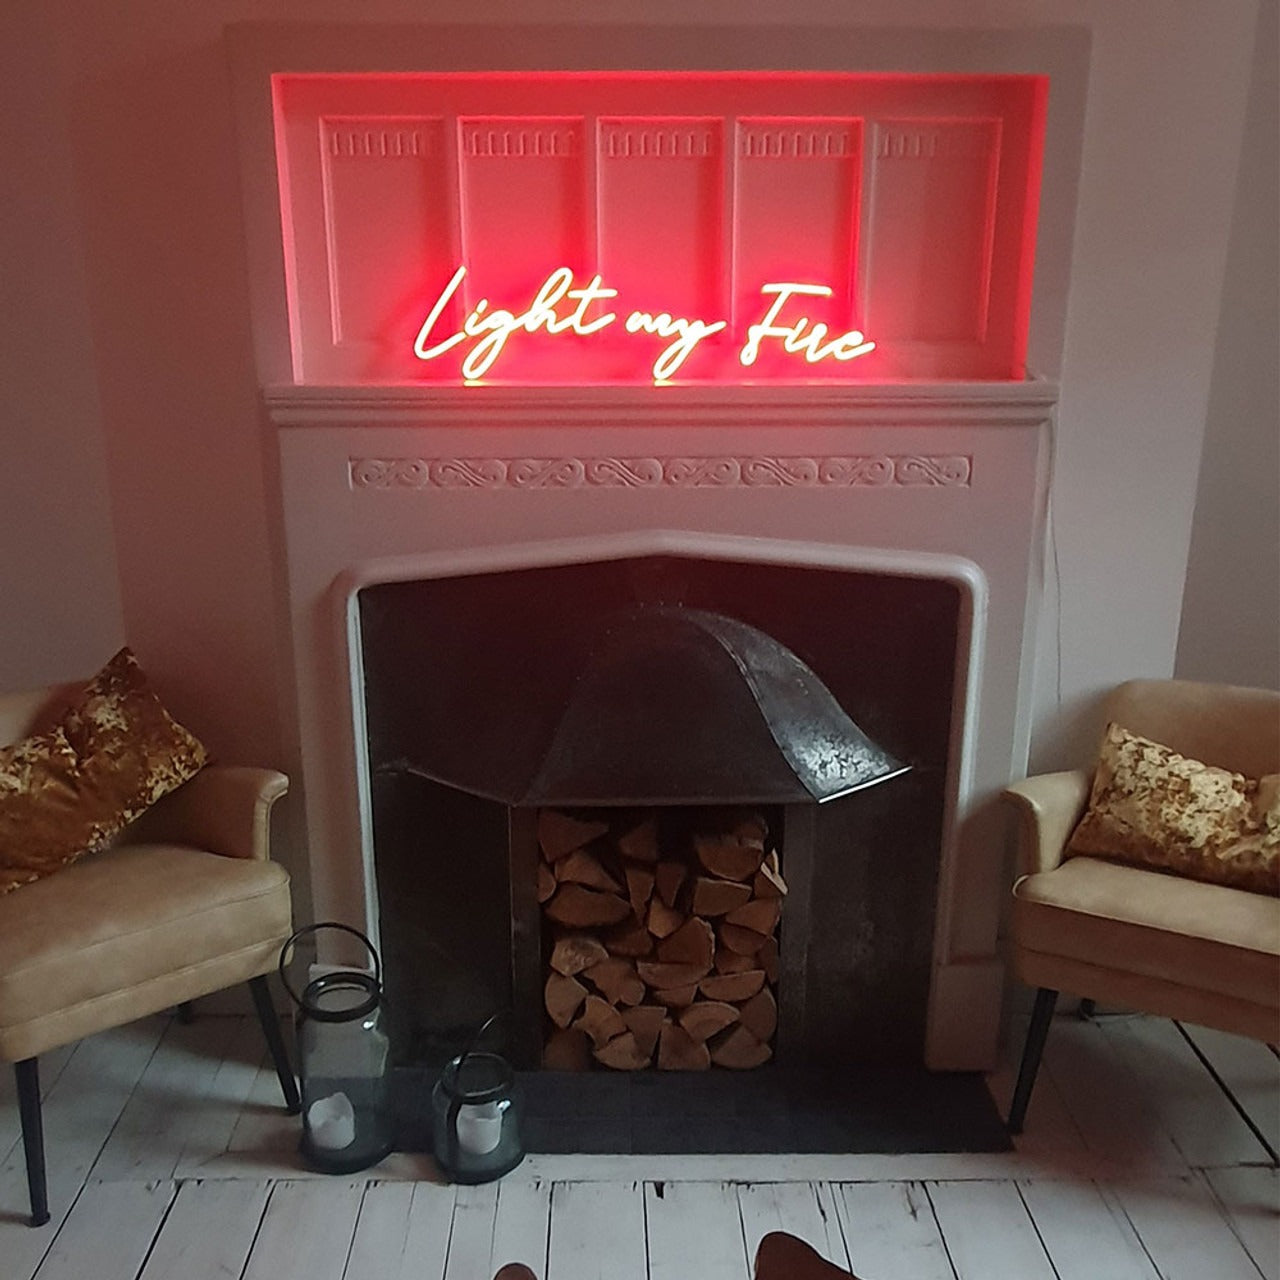 An ideal location to display your neon sign for father's day